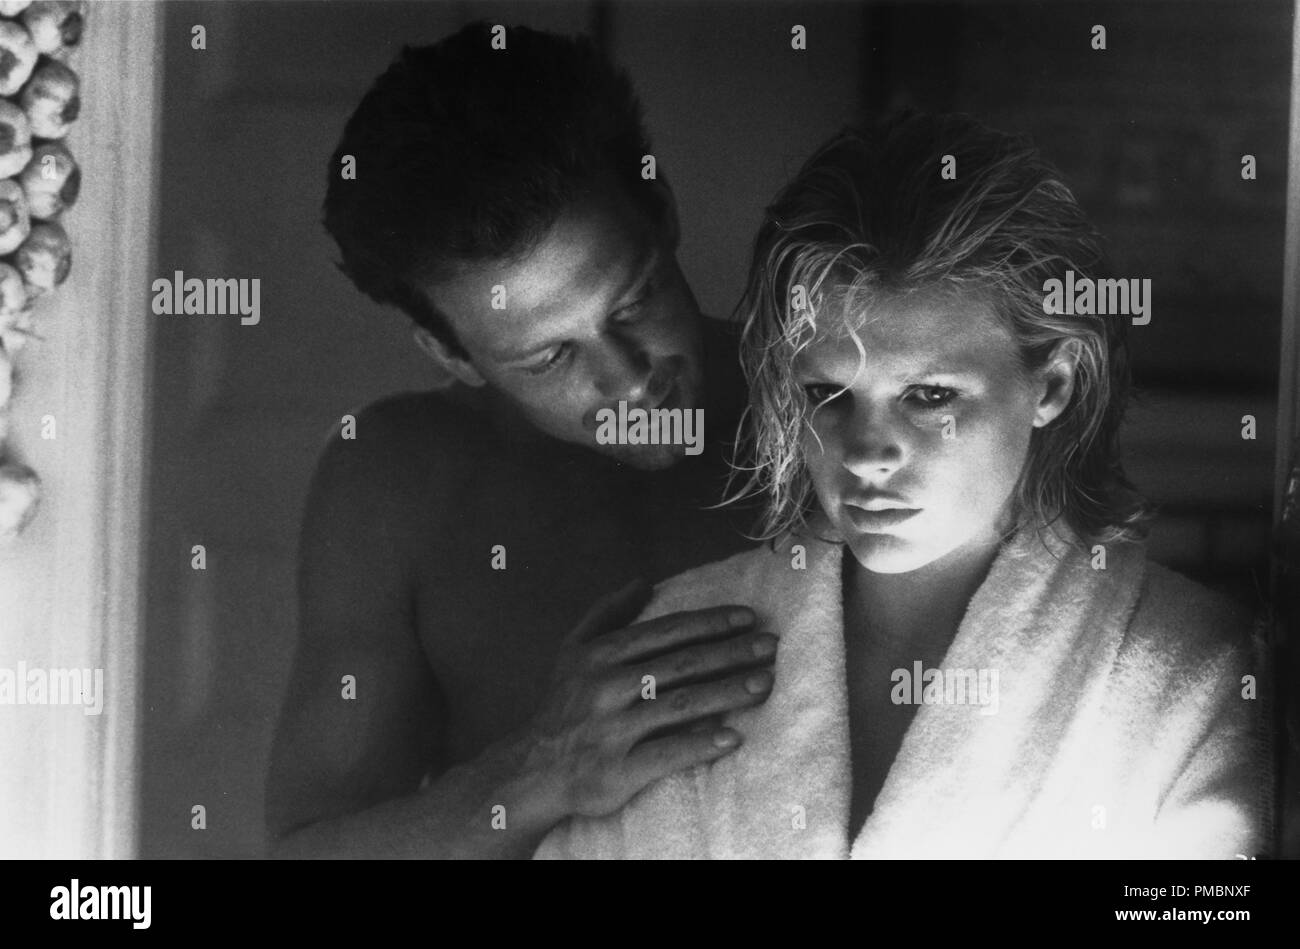 Mickey Rourke and Kim Bassinger in '9 1/2 Weeks', 1984 Jonesfilm   File Reference # 32603 111THA Stock Photo